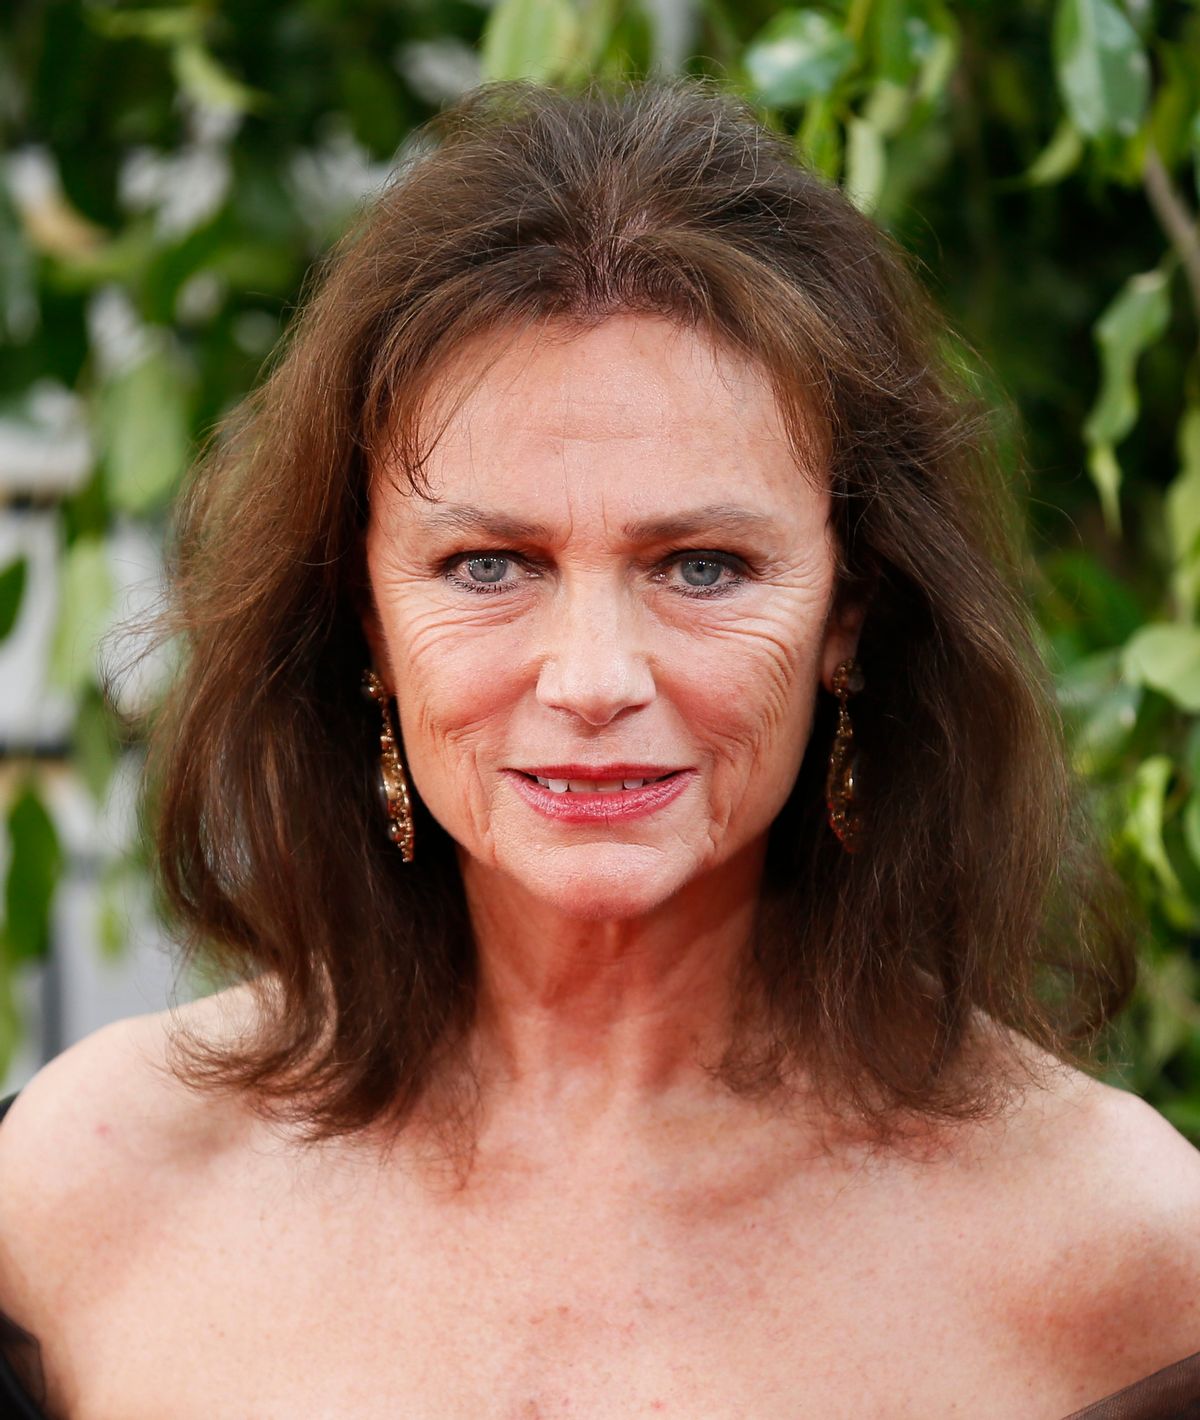 Actress Jacqueline Bisset arrives at the 71st annual Golden Globe Awards in Beverly Hills, California January 12, 2014.  REUTERS/Danny Moloshok  (UNITED STATES - Tags: Entertainment)(GOLDENGLOBES-ARRIVALS) - RTX17B3B  (Reuters)